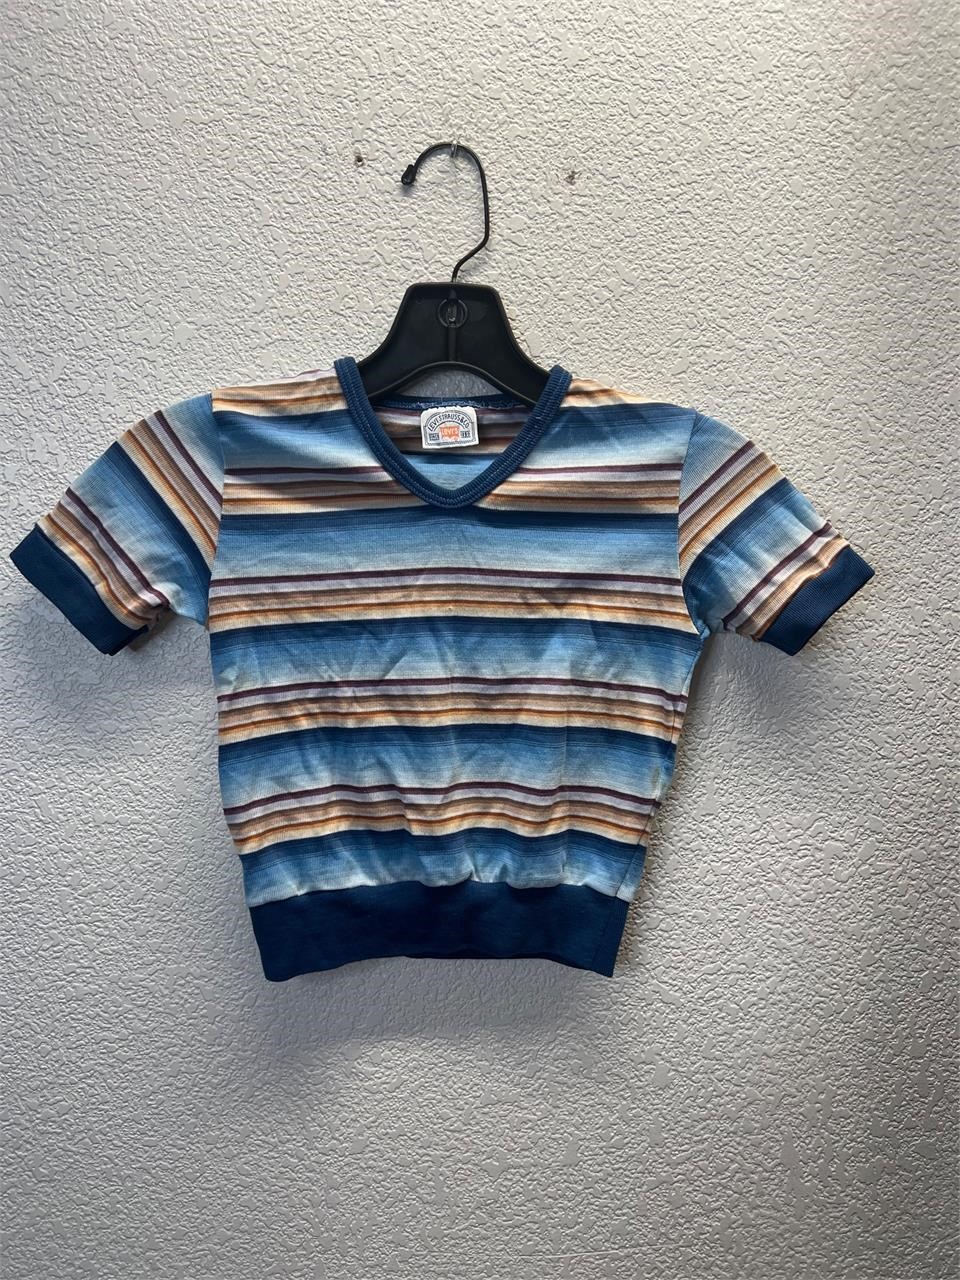 Vintage 70s Levi’s Youth Striped Shirt